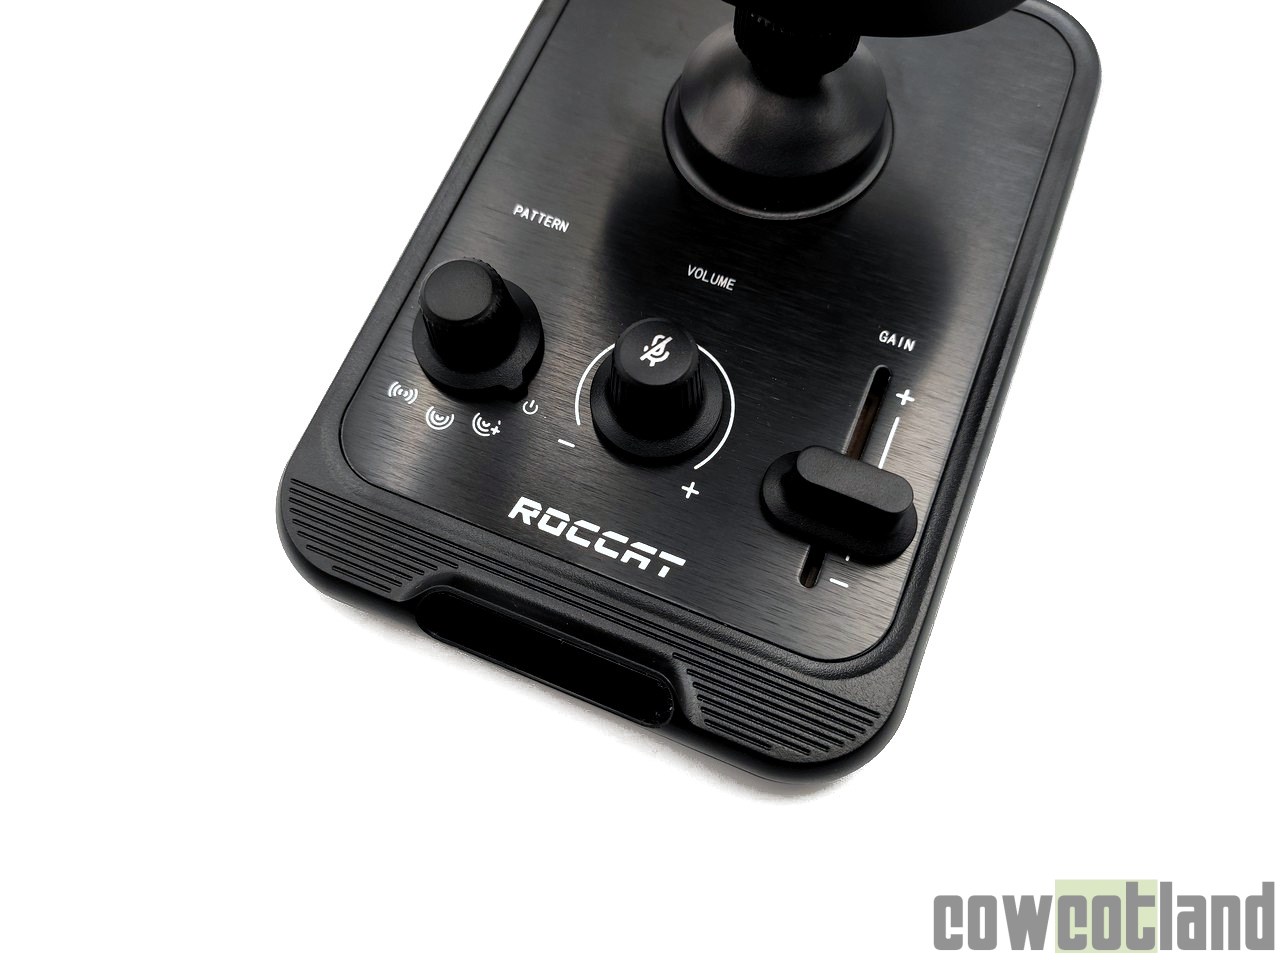 Image 45871, galerie Test micro ROCCAT Torch : ROCCAT se lance dans le micro gaming et streaming 